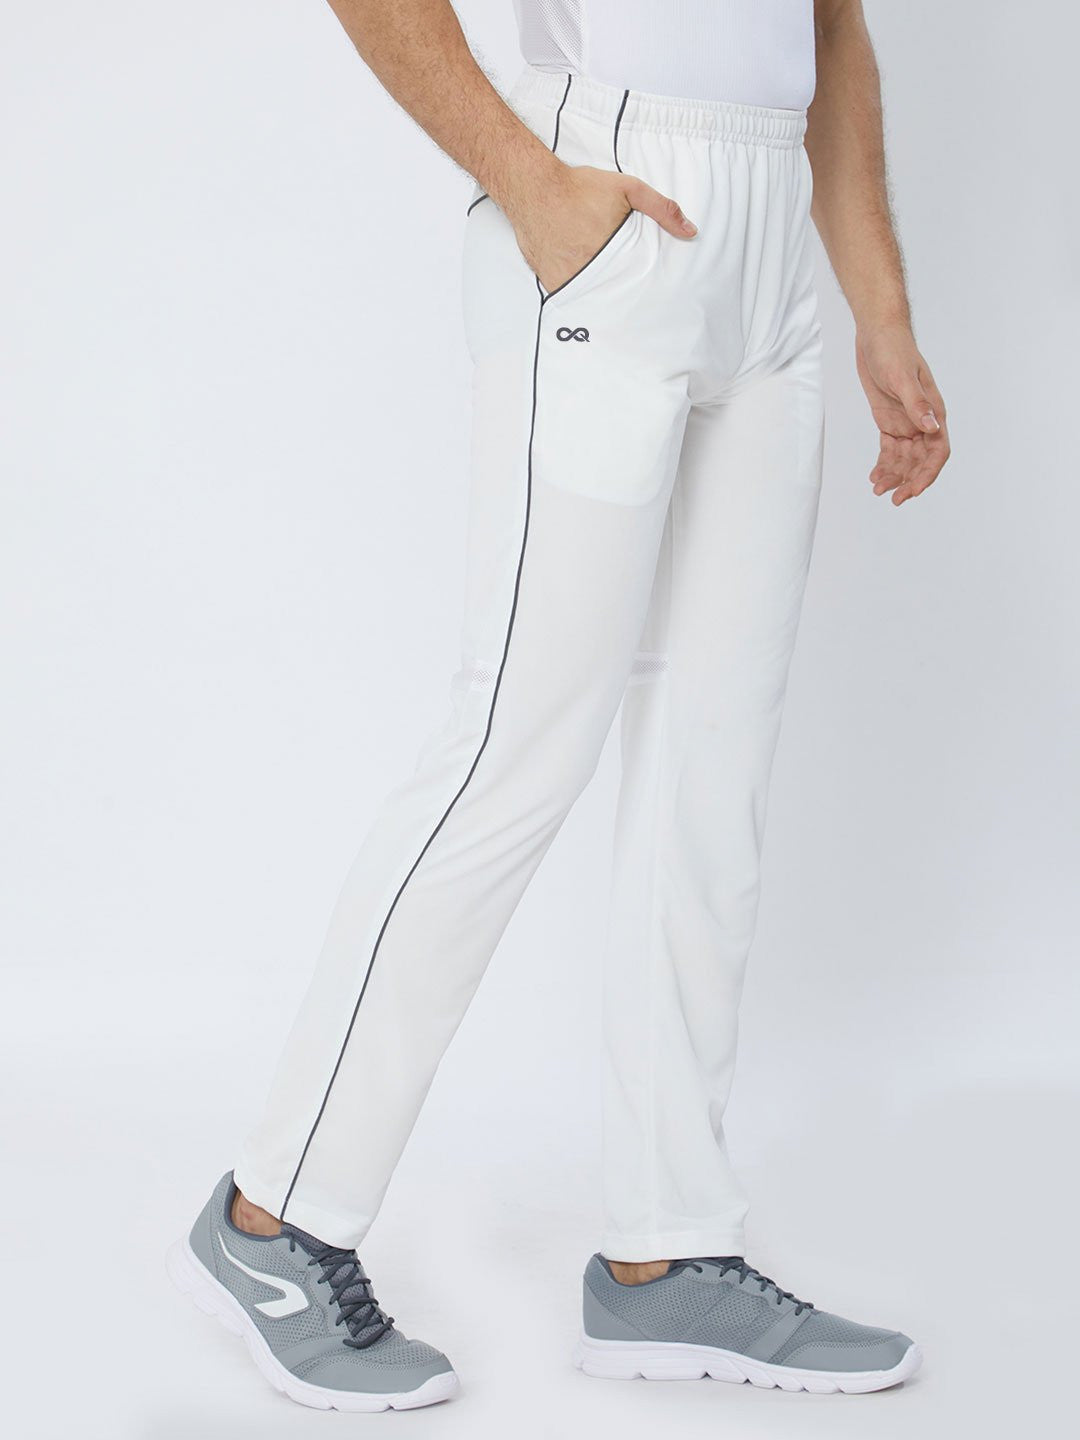 2023 Crystal Stripe Womens Cricket Lower Pants For Actors Style 0212 From  Blossommg, $92.52 | DHgate.Com